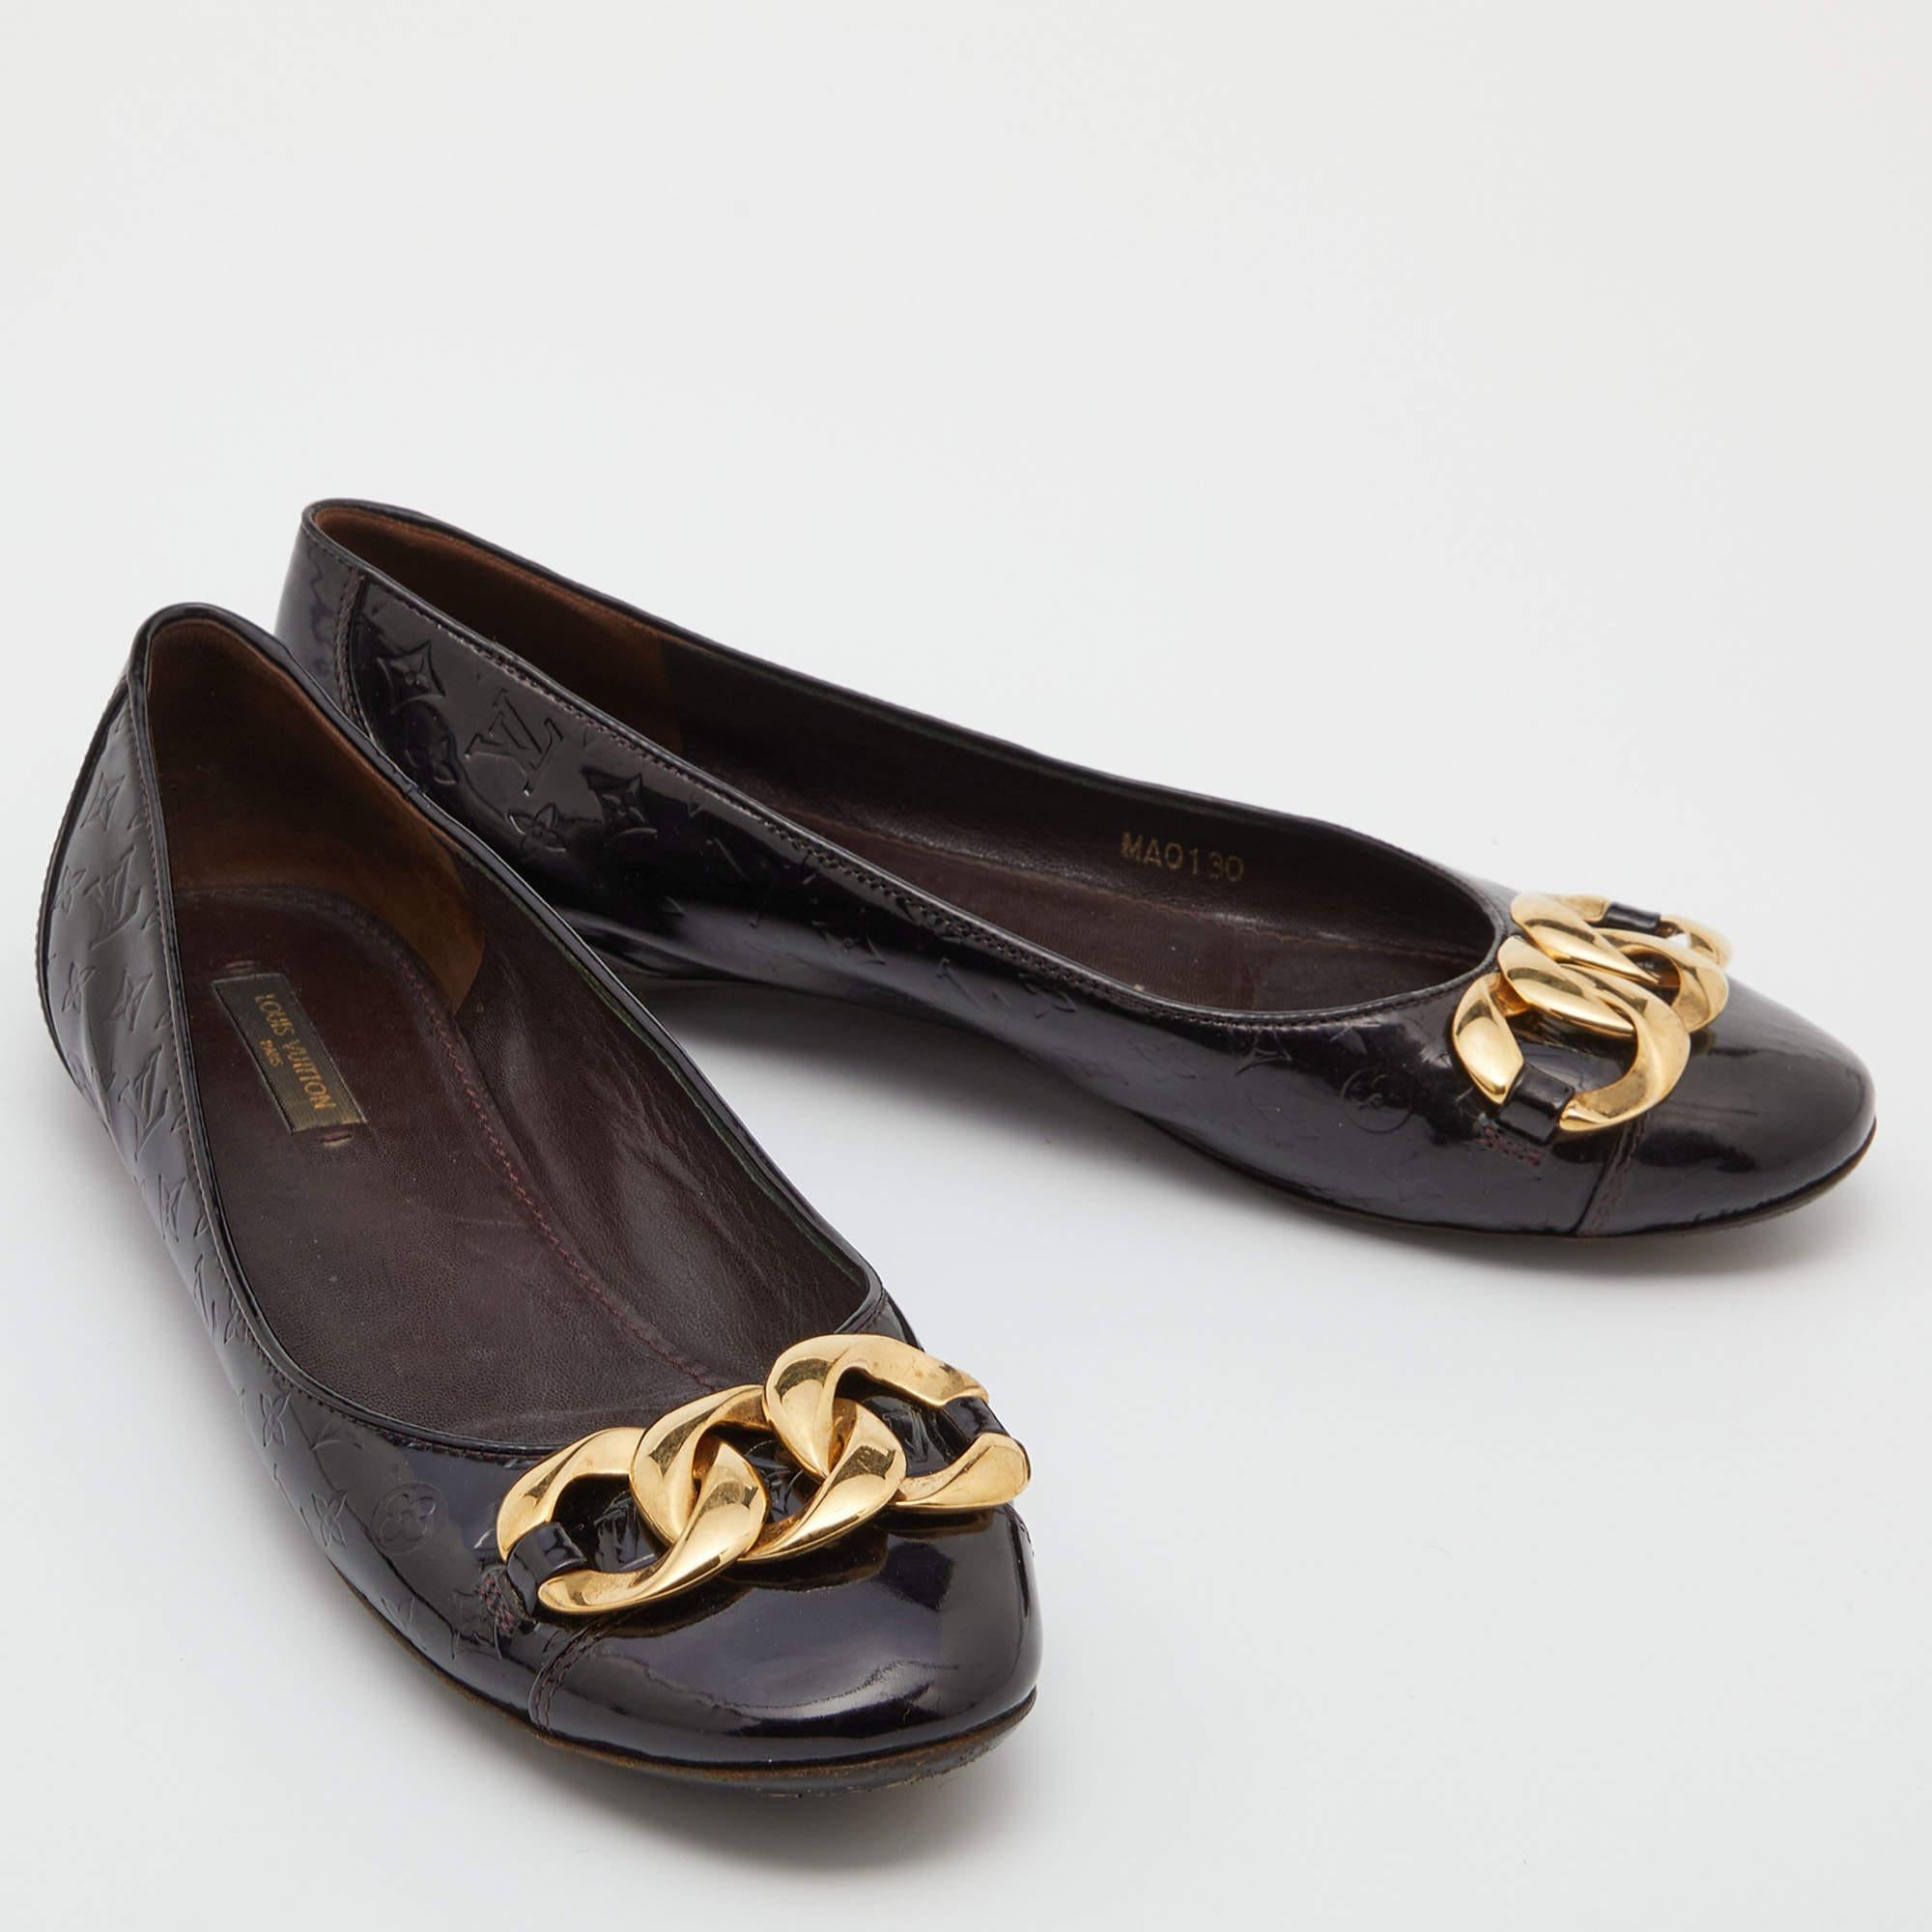 Defined by comfort and effortless style, no wardrobe is ever complete without a pair of chic ballet flats. This pair is lovely to look at and is equipped with elements like a comfortable insole and a durable sole.

